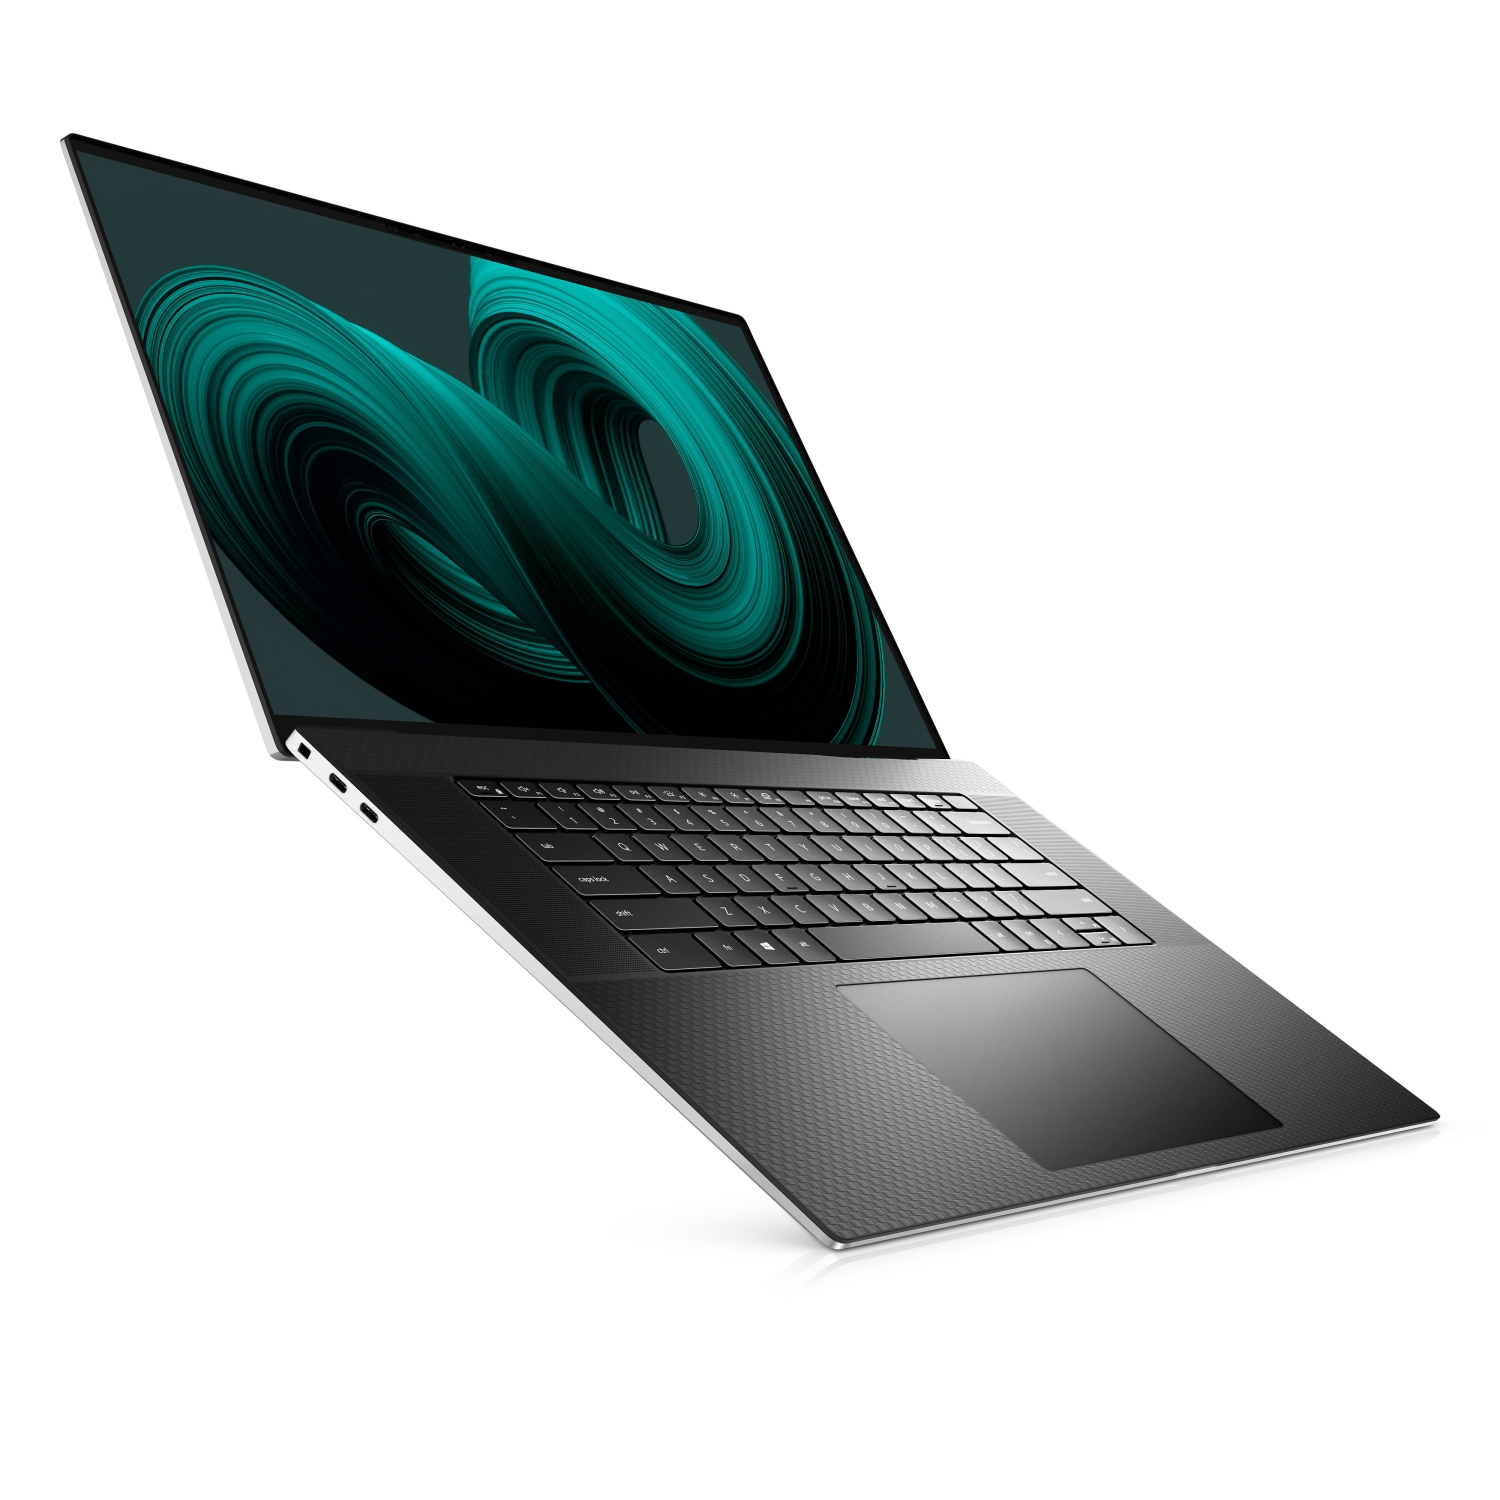 Refurbished (Excellent) - Dell XPS 17 9710 Laptop (2021), 17" 4K Touch, Core i9 - 512GB SSD - 8GB RAM - RTX 3060, 8 Cores @ 4.9 GHz - 11th Gen CPU Certified Refurbished